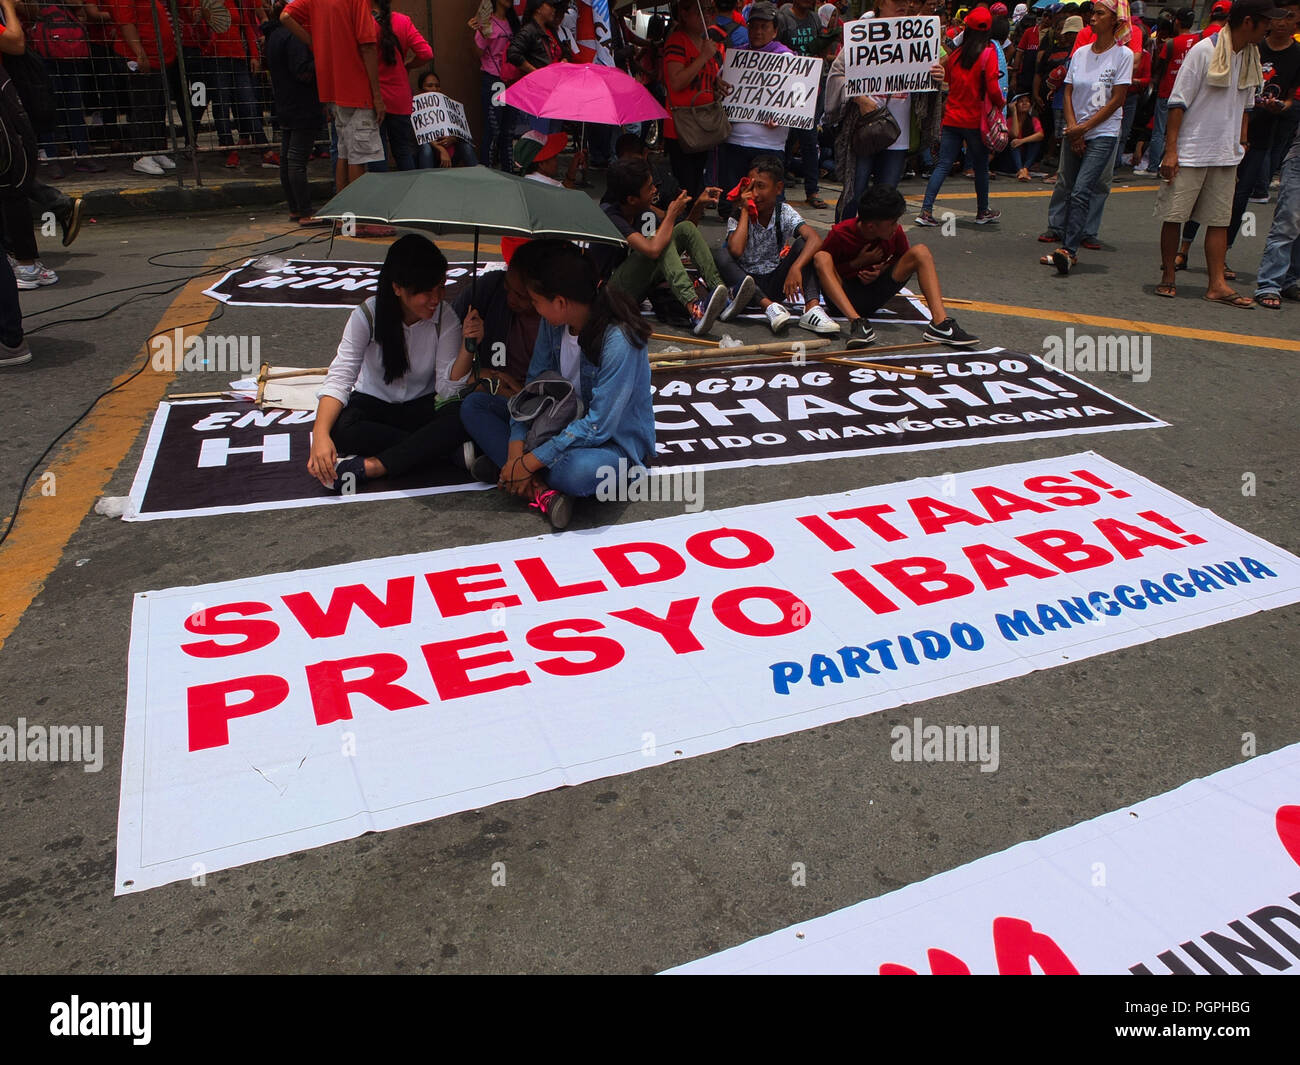 Manila, Philippines. 7th Feb, 2013. Protesters taking a break with scattered banners and placards layed on the ground.Labor Union from different business sectors leads National Heroes' Day march to Mendiola. Labor coalitions will mark National Heroes' Day on Monday by protesting the Duterte administration's alleged failure to address workers' issues. Credit: Josefiel Rivera/SOPA Images/ZUMA Wire/Alamy Live News Stock Photo